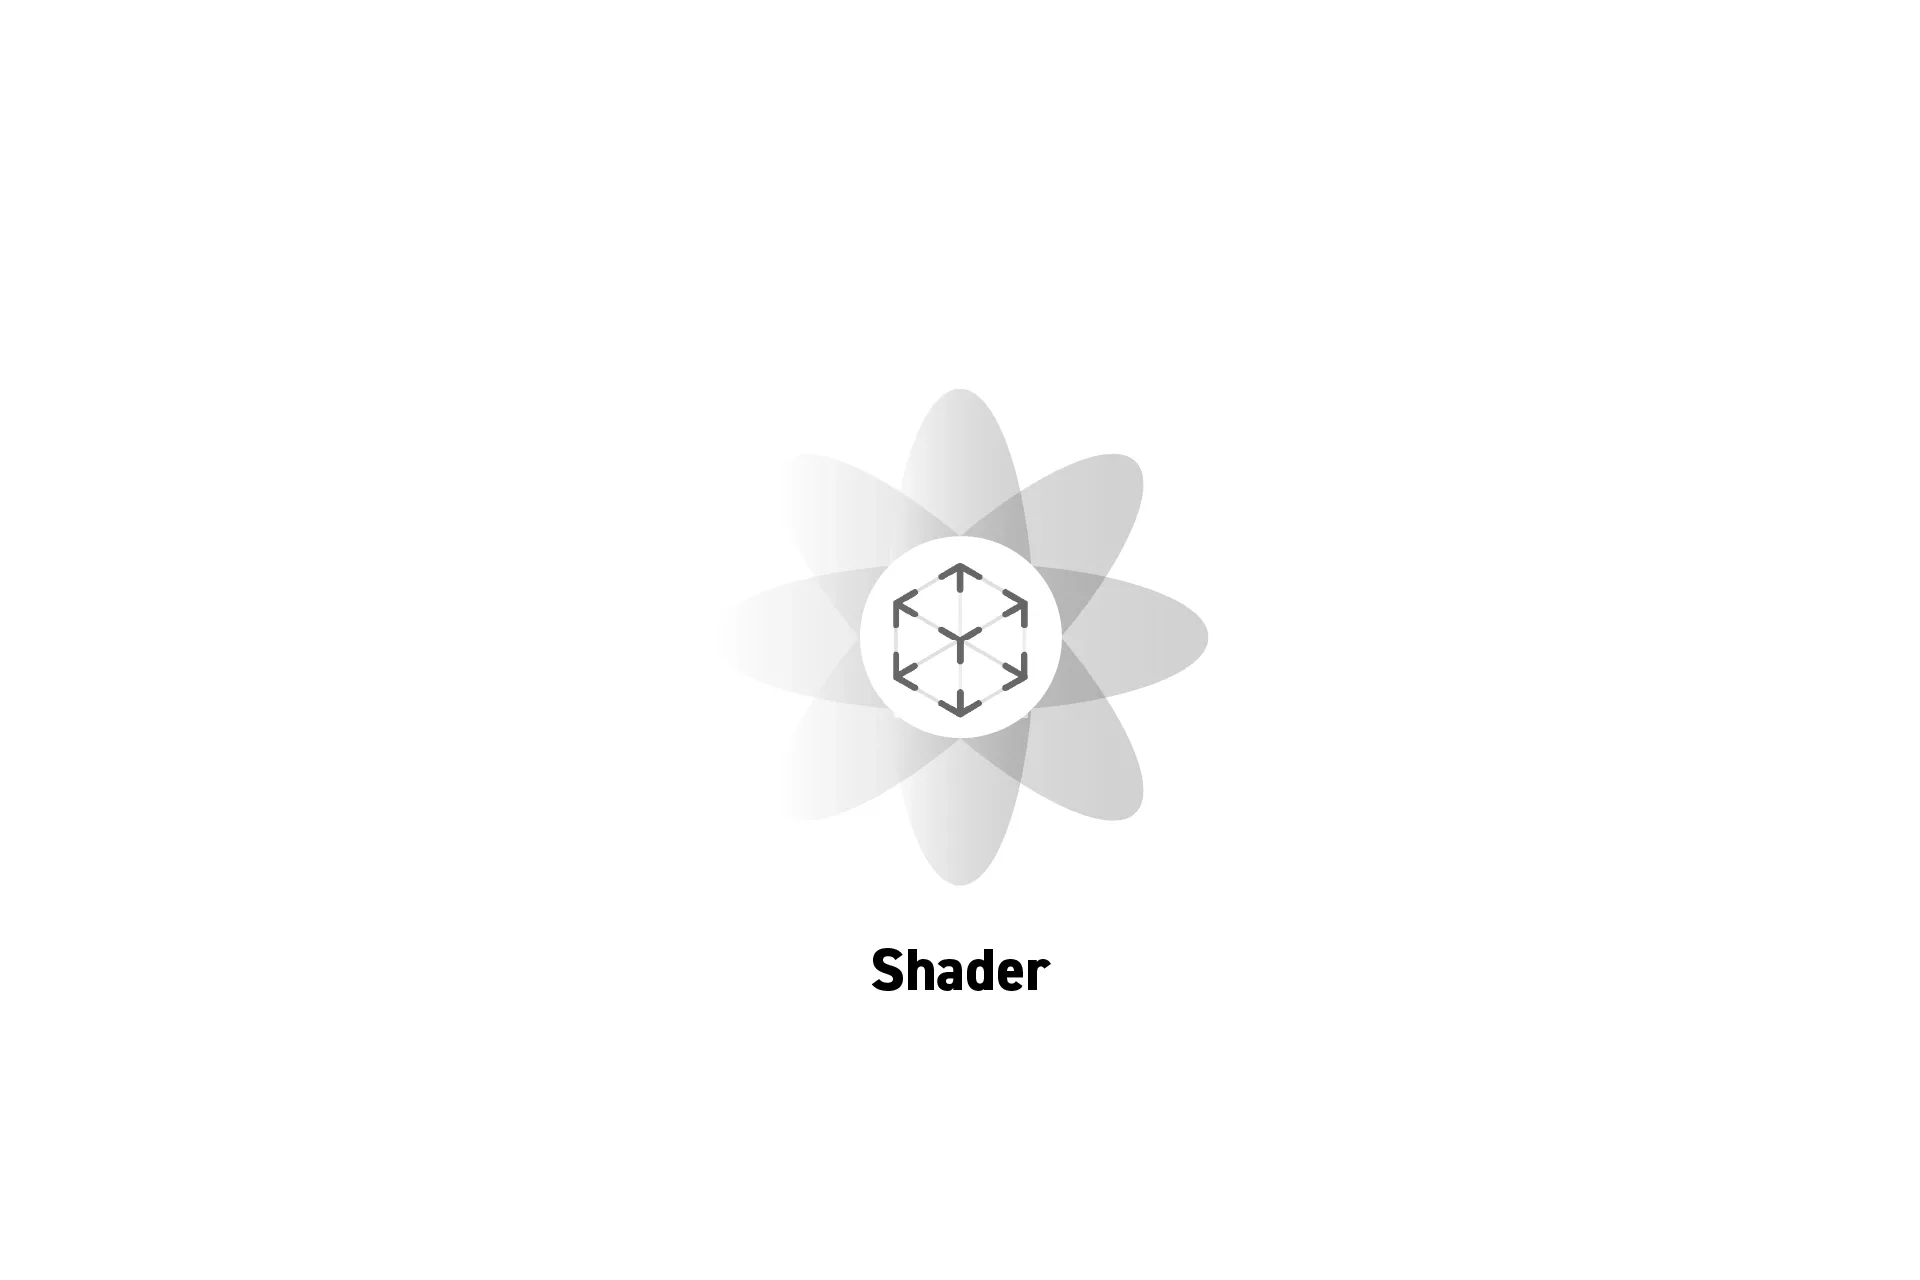 A flower that represents spatial computing with the text "Shader" beneath it.